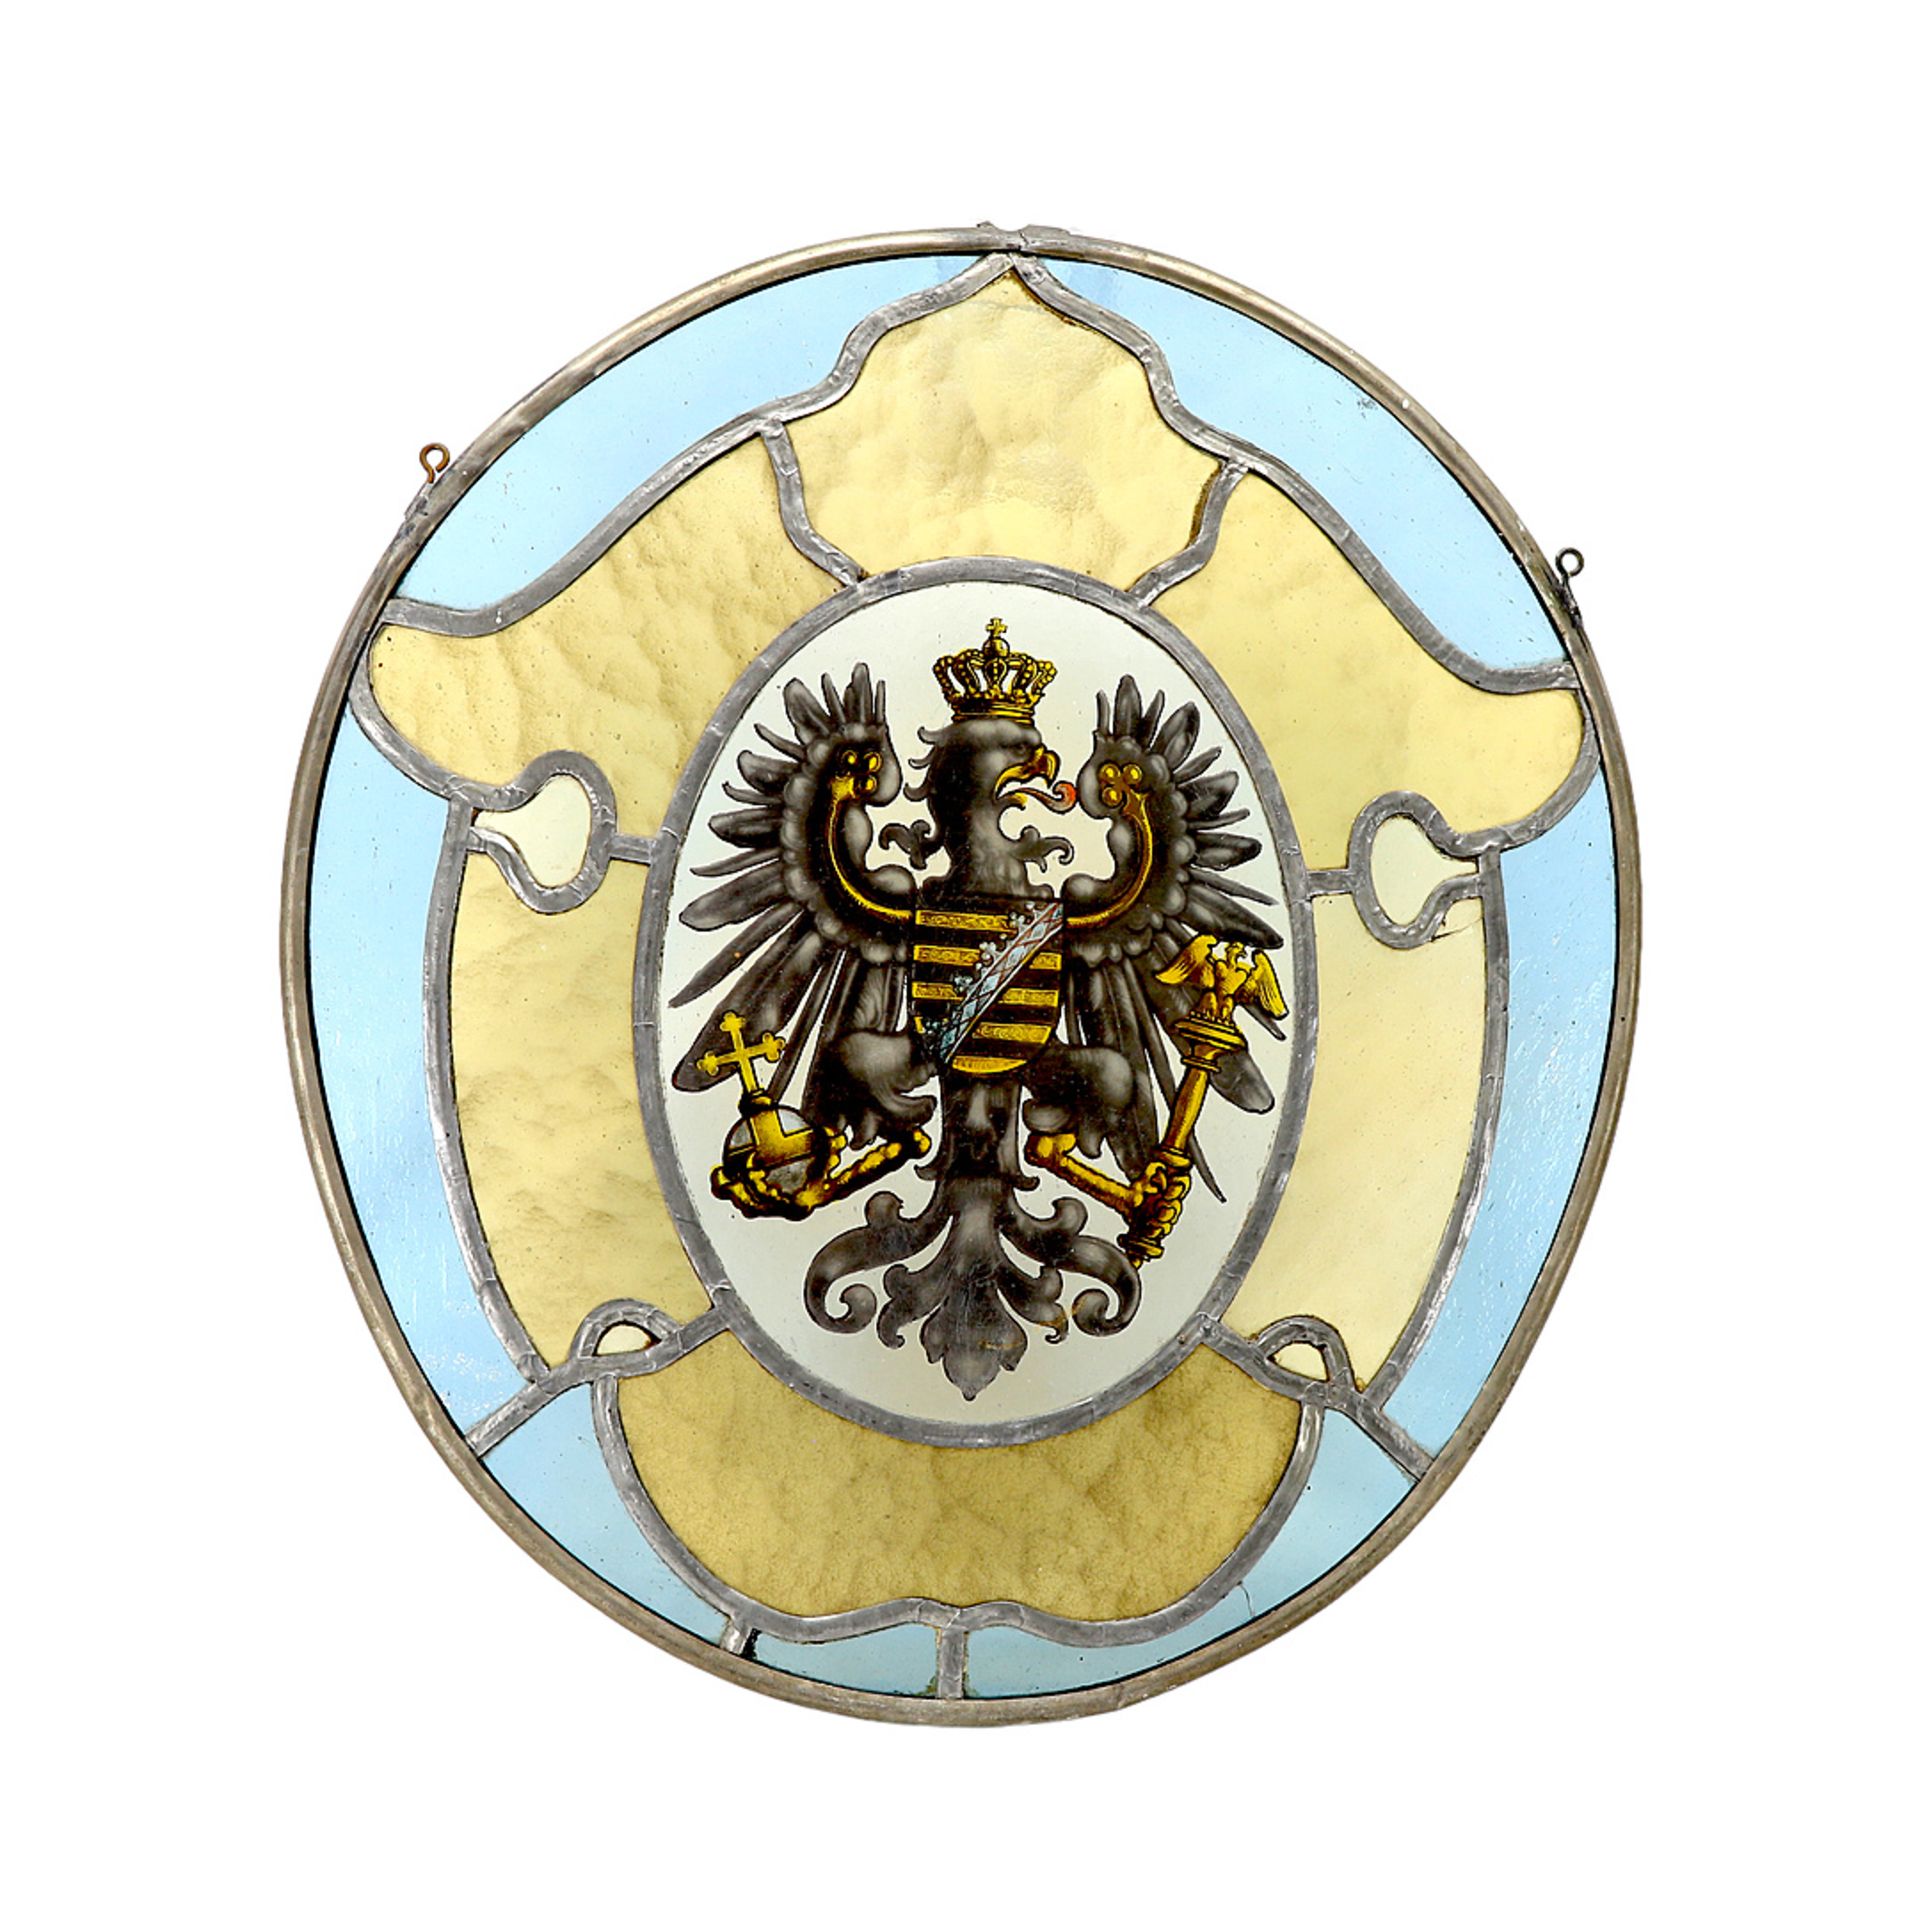 German glass workshop, Glass painting with the Saxony coat of arms, around 1880 - Image 2 of 2